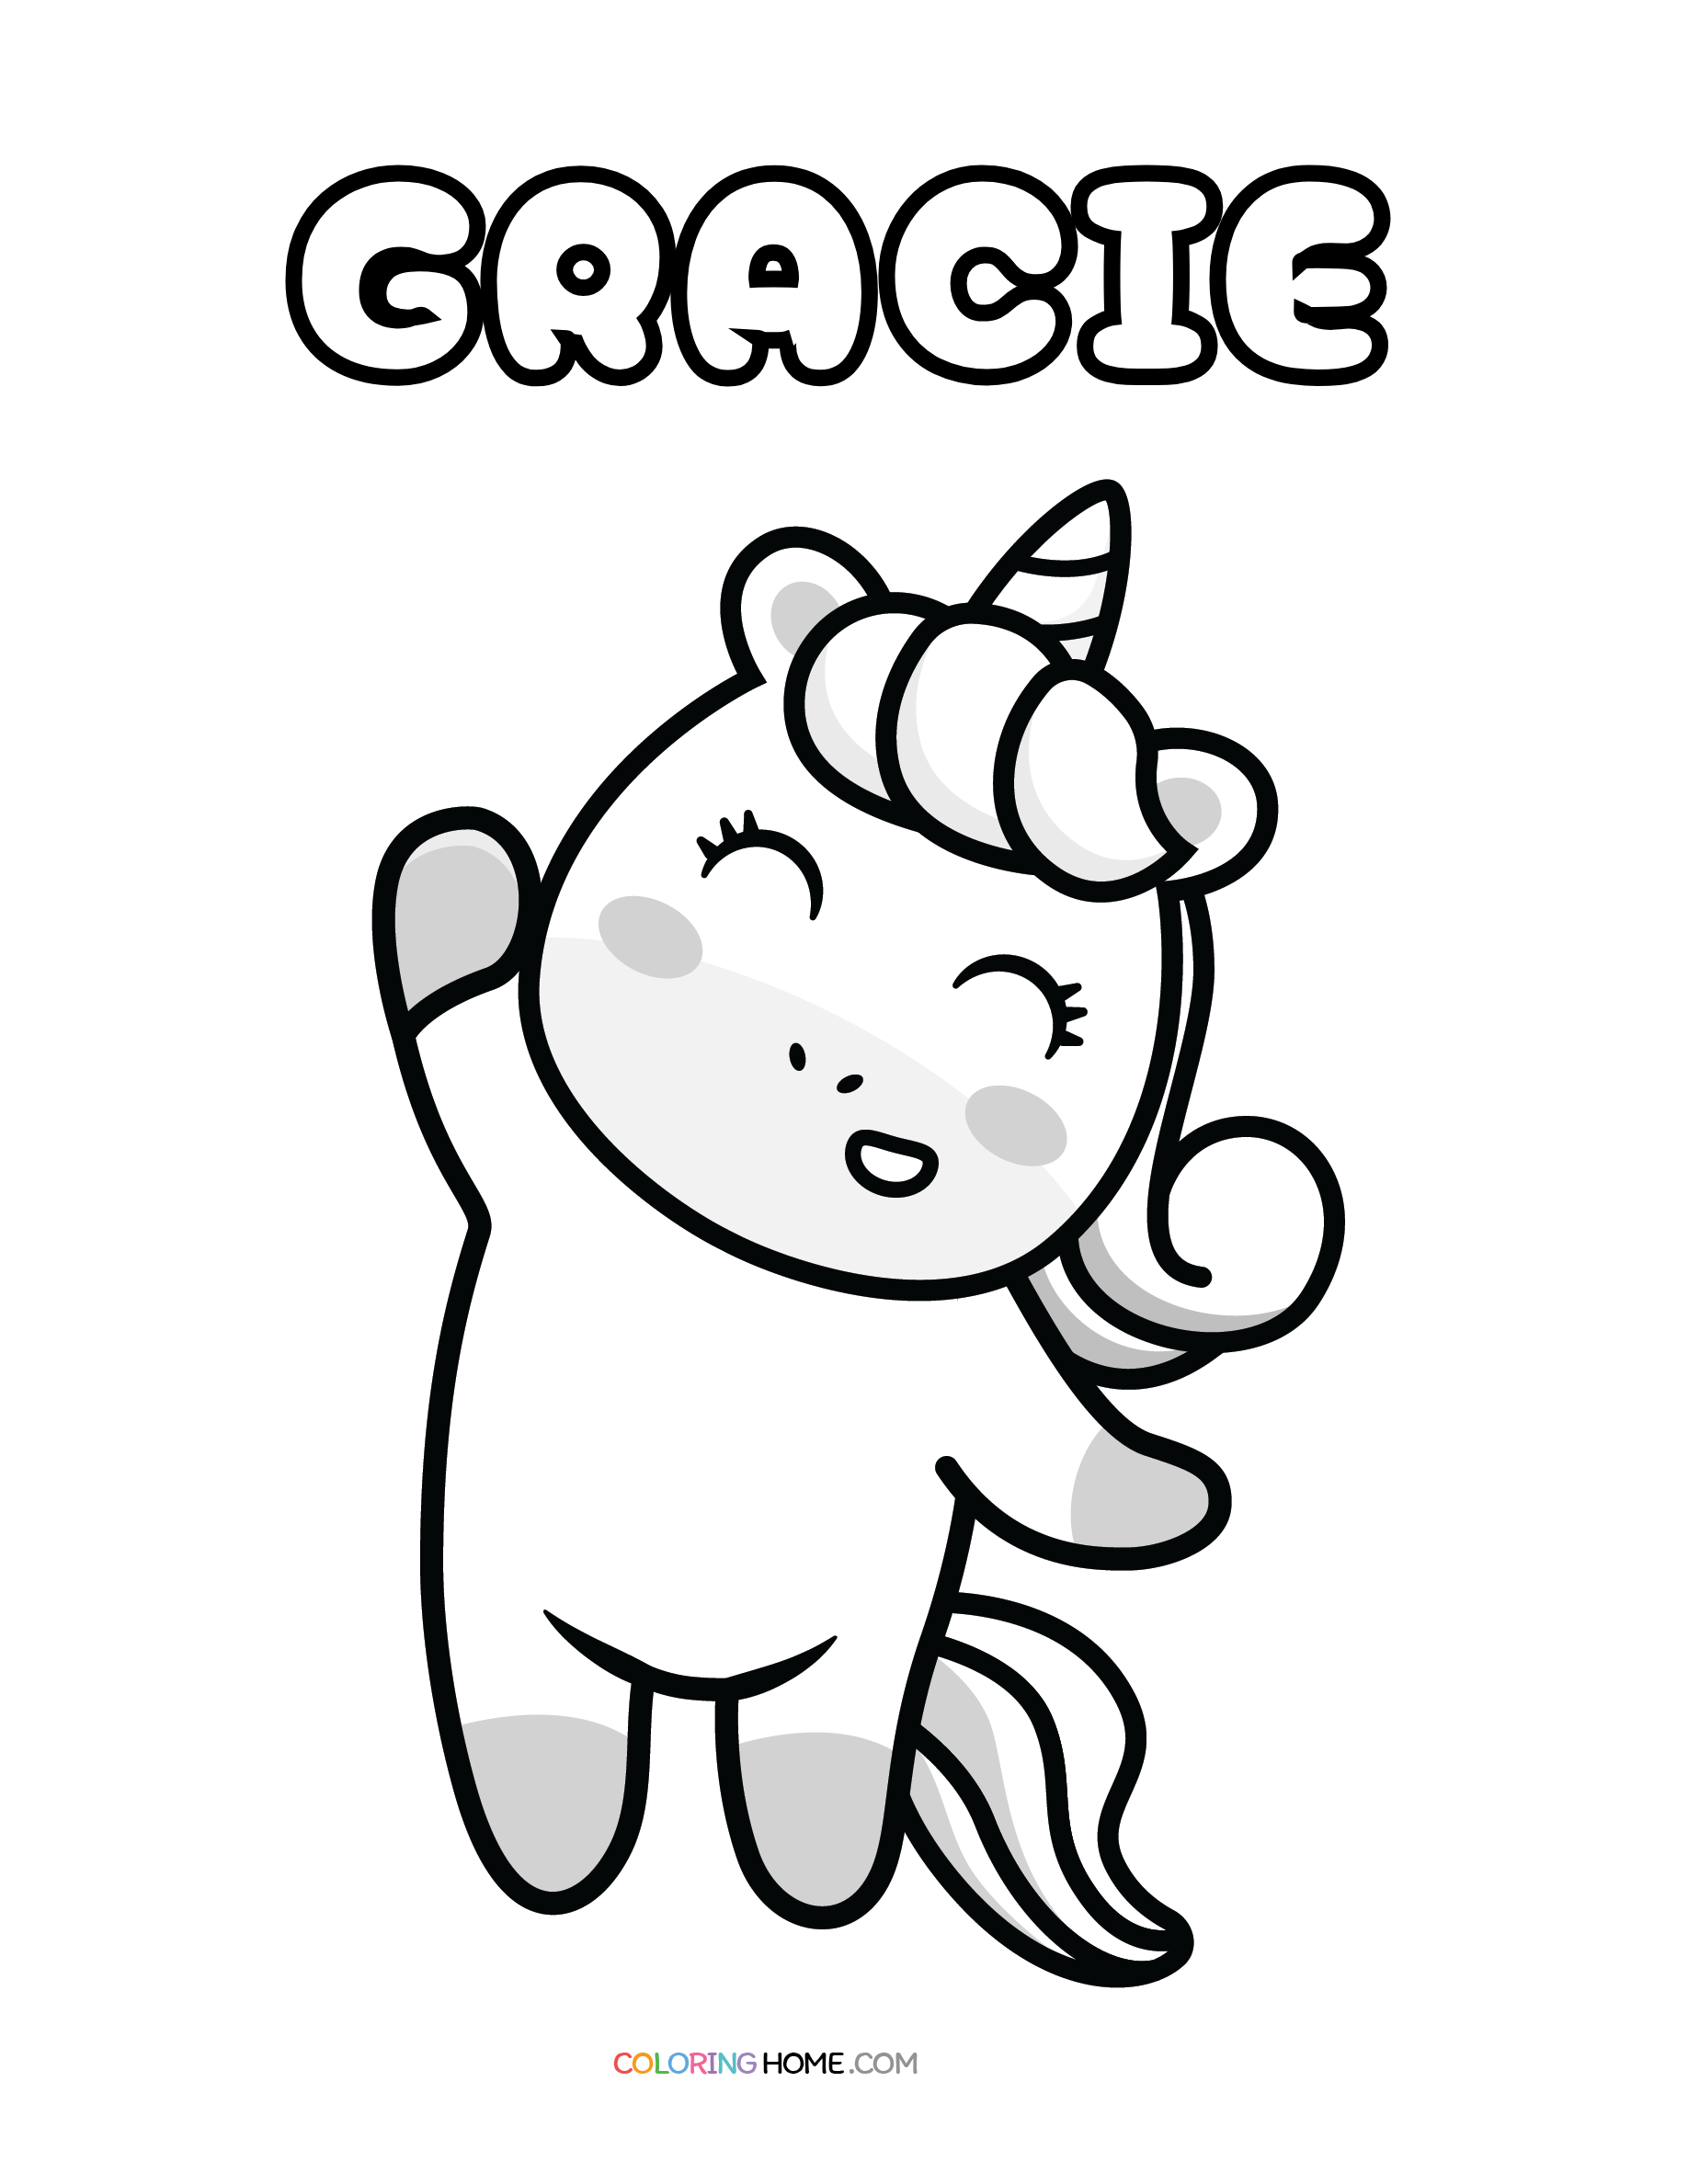 Gracie Name Coloring Pages - Coloring Home